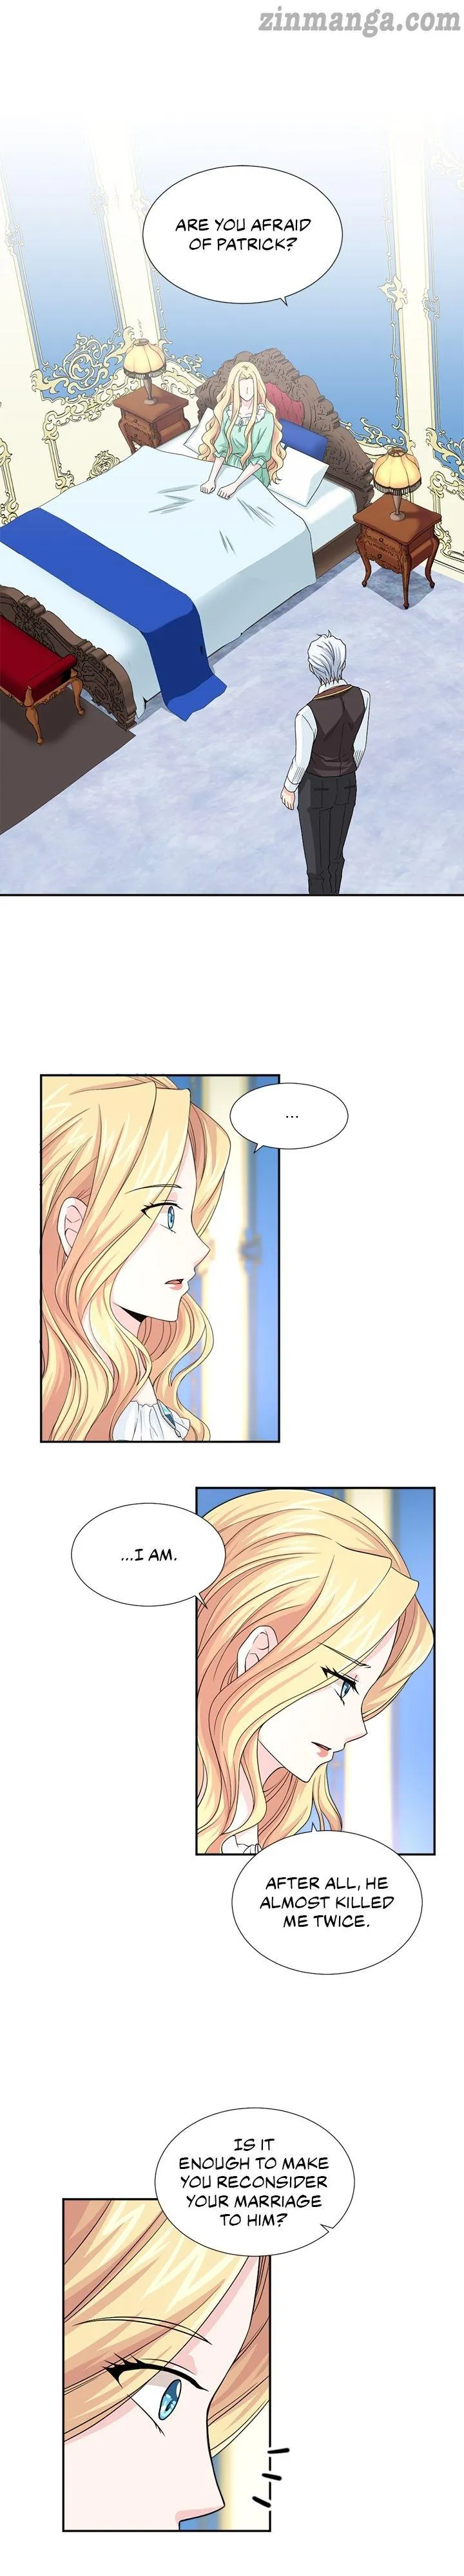 Between Two Lips - Page 2